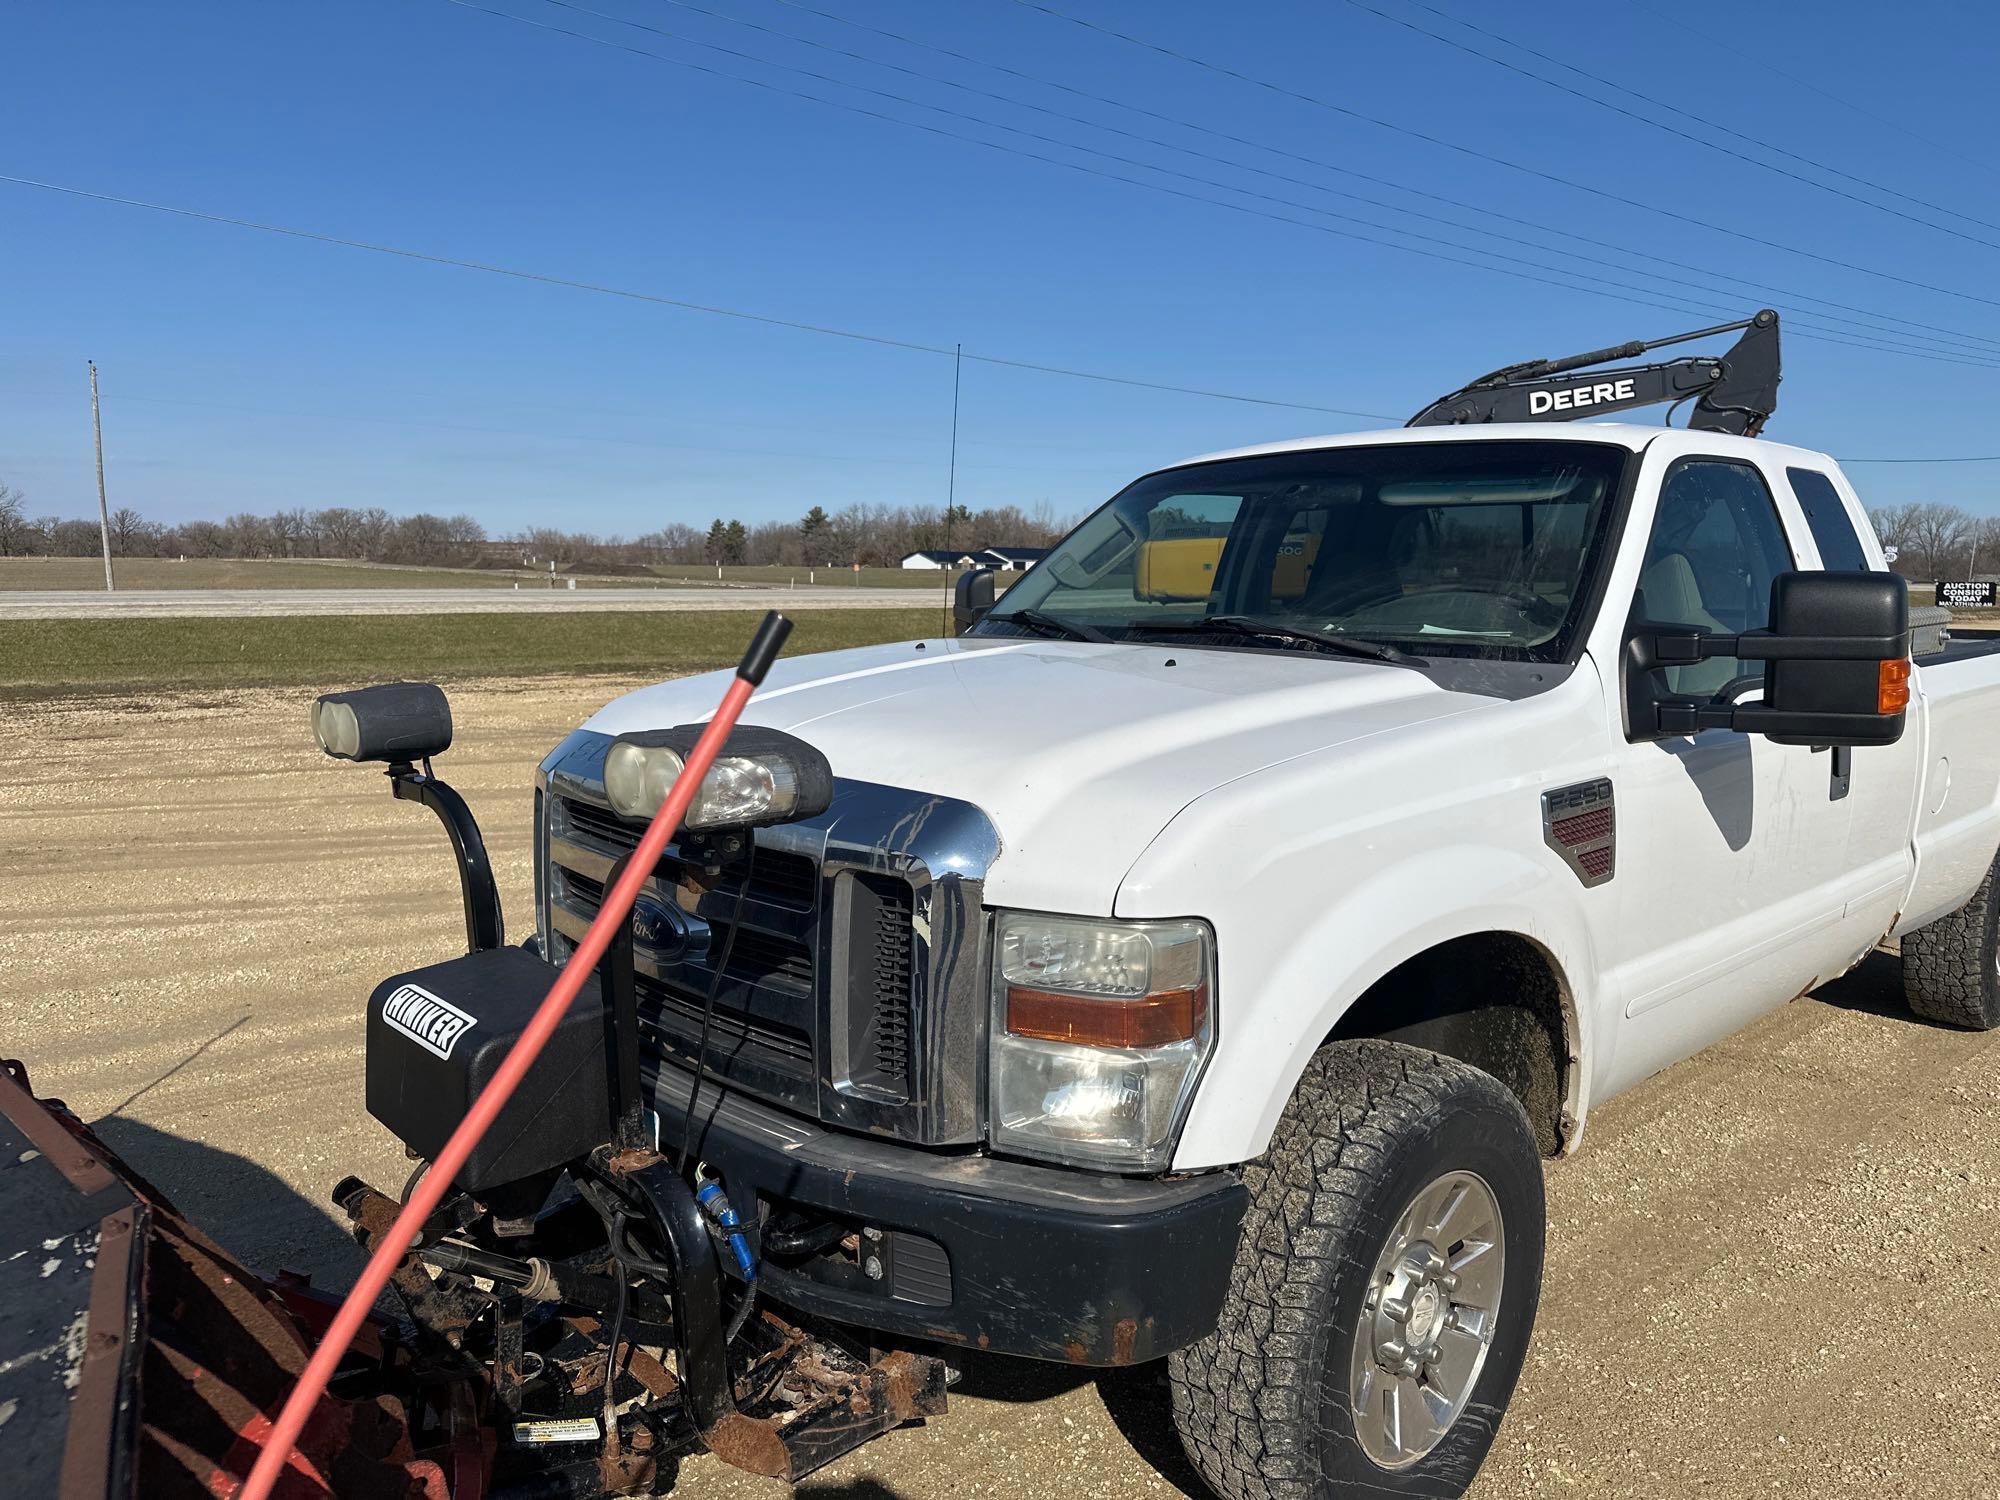 2008 F 250 with Plow